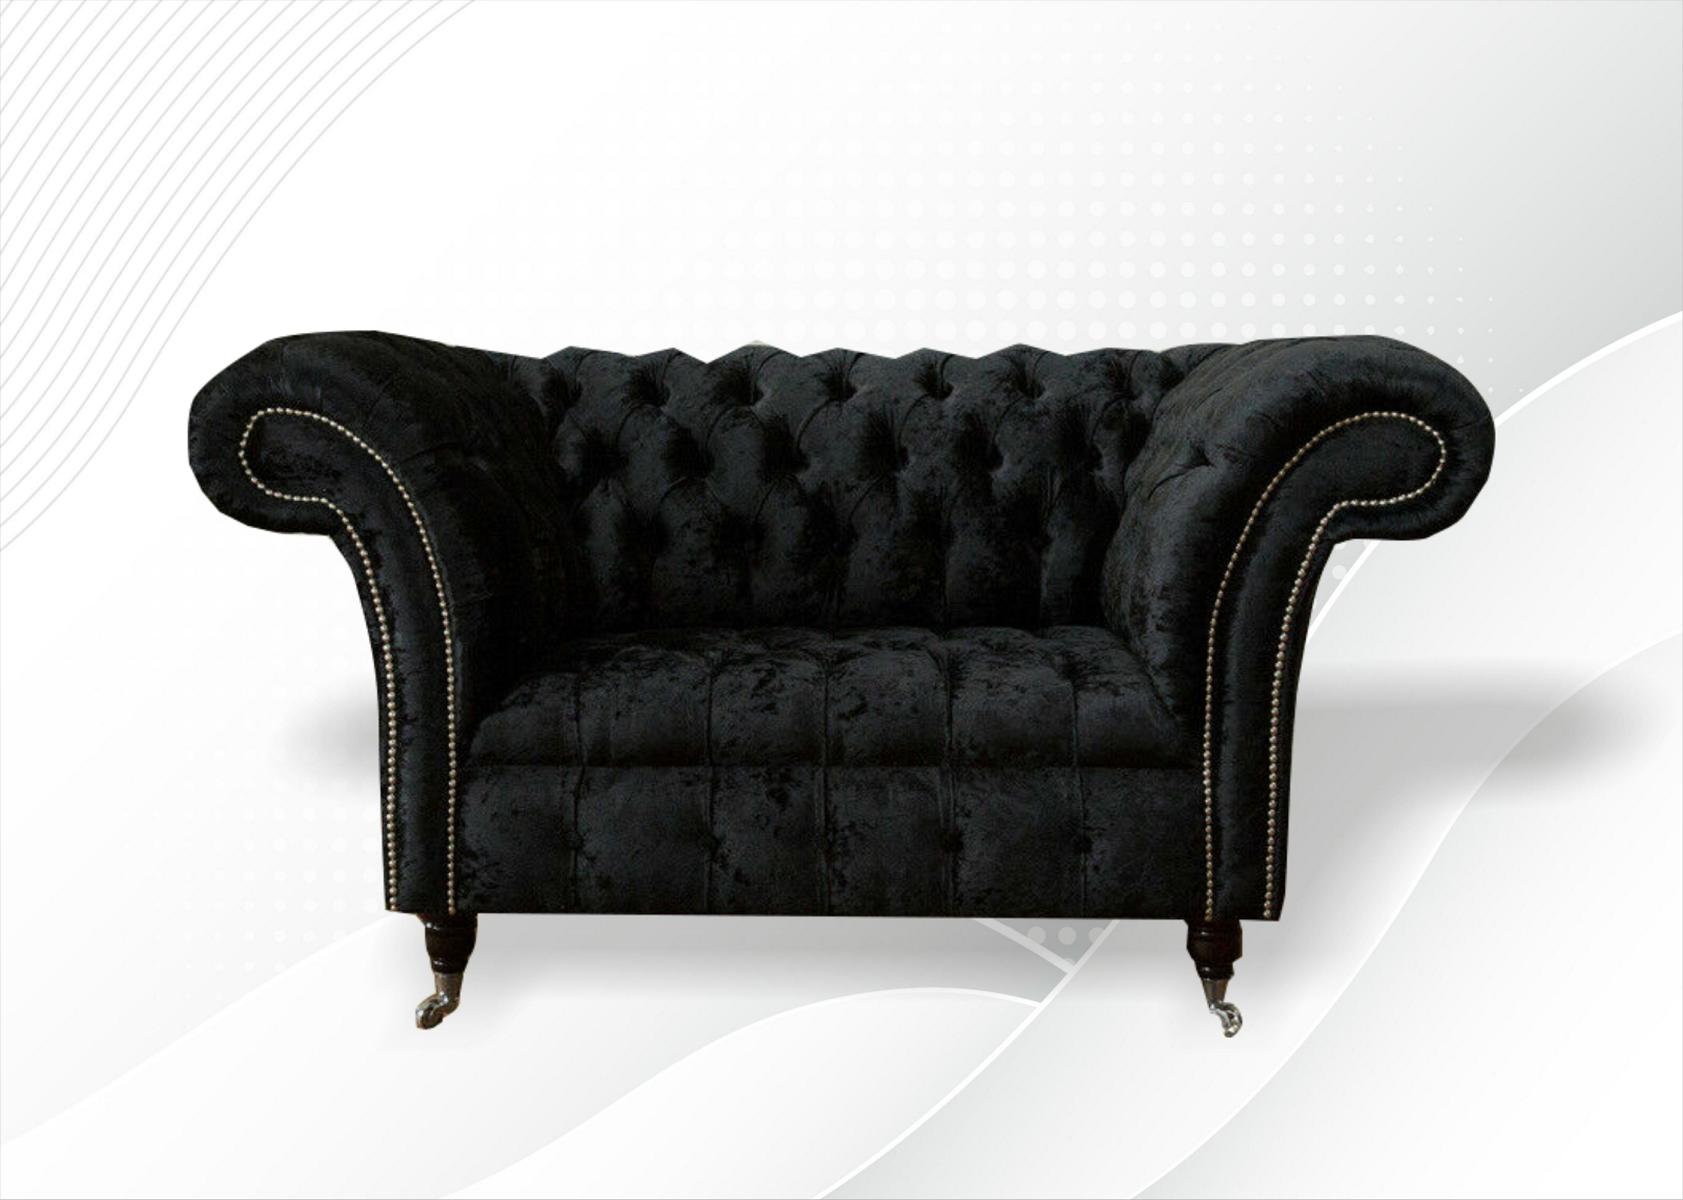 Chesterfield Sessel Design Polster Sofa Couch Couchen Sofas Textil Stoff